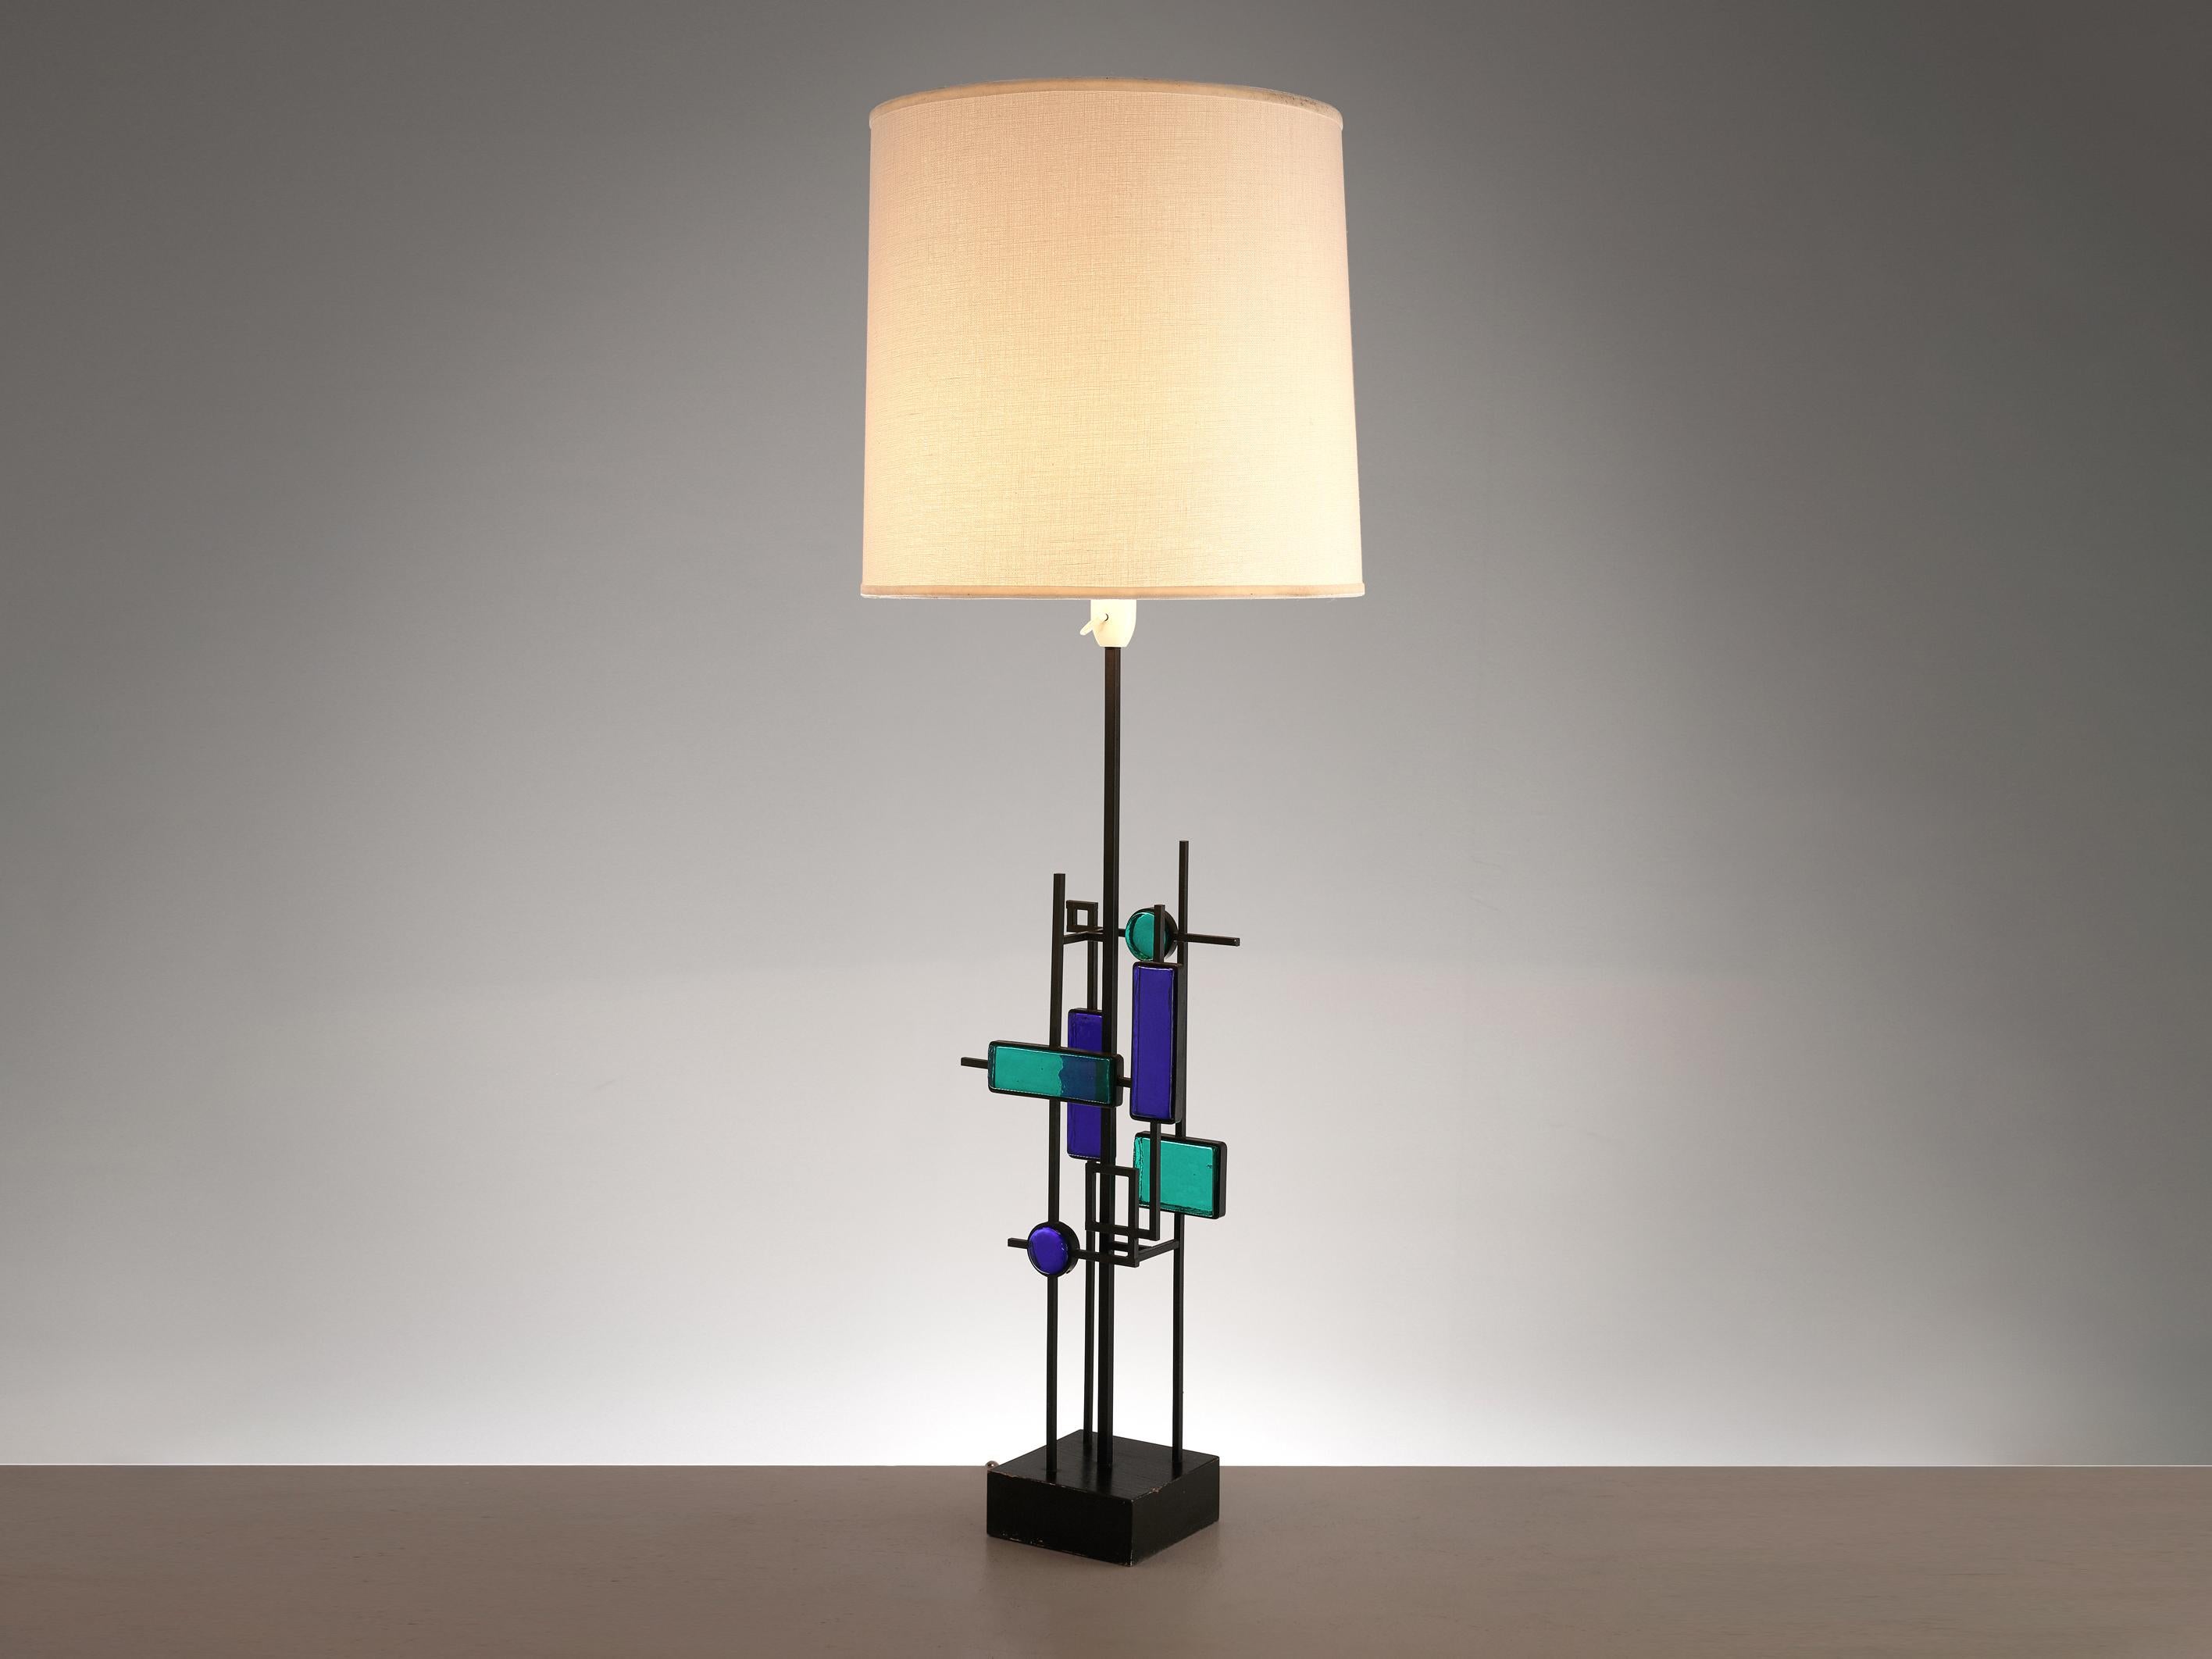 Svend Aage Holm Sørensen, table lamp, iron, wood and glass, Sweden, 1960s

This table lamp is an excellent example of finding itself at the intersection of art and design. The iron frame shows a beautiful construction of clear lines placed